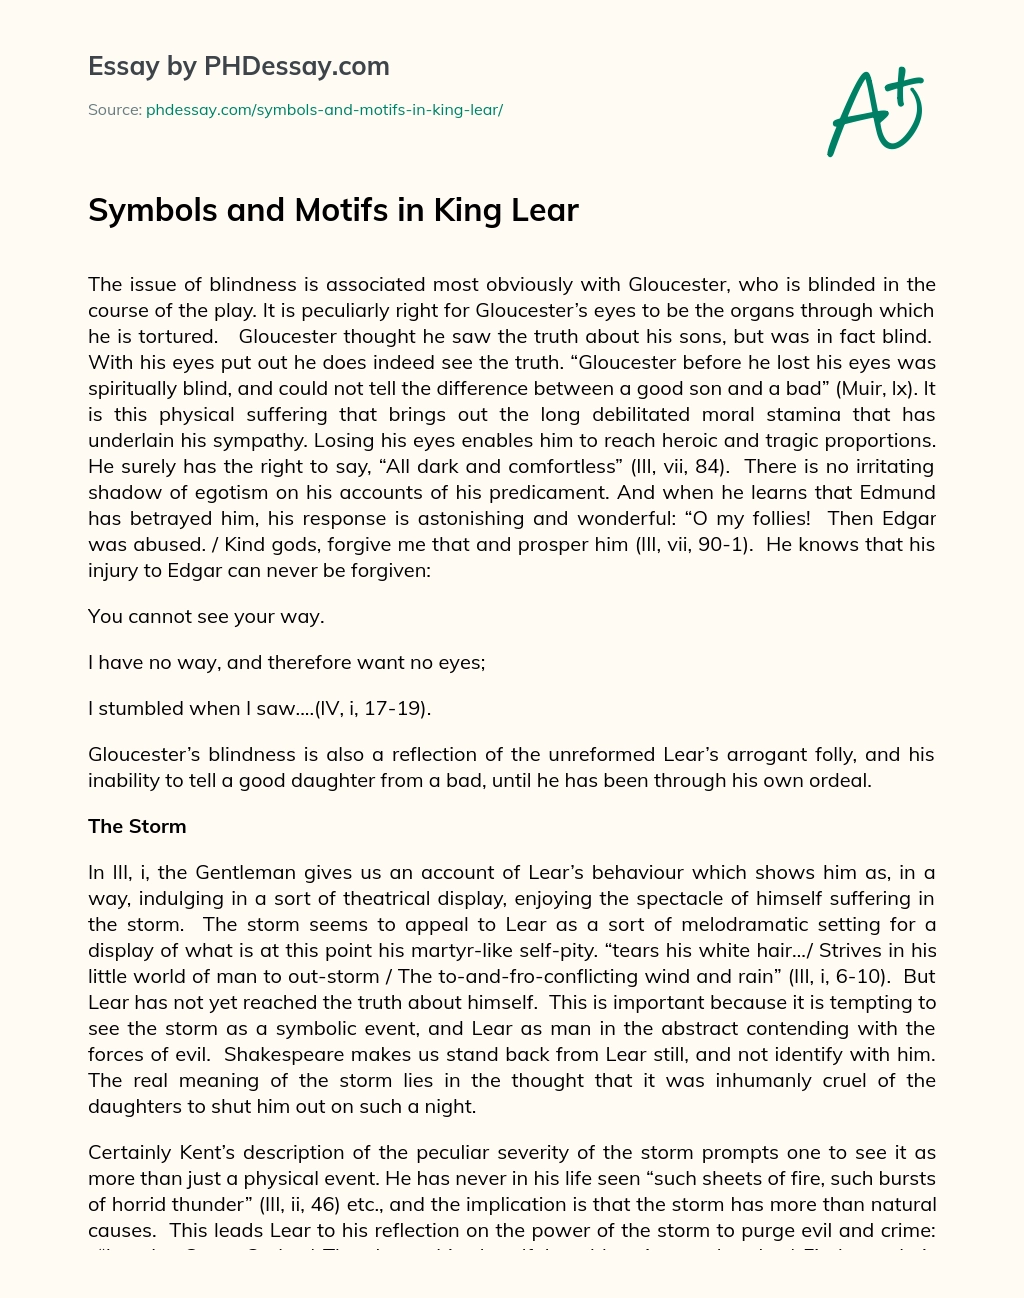 Symbols and Motifs in King Lear essay